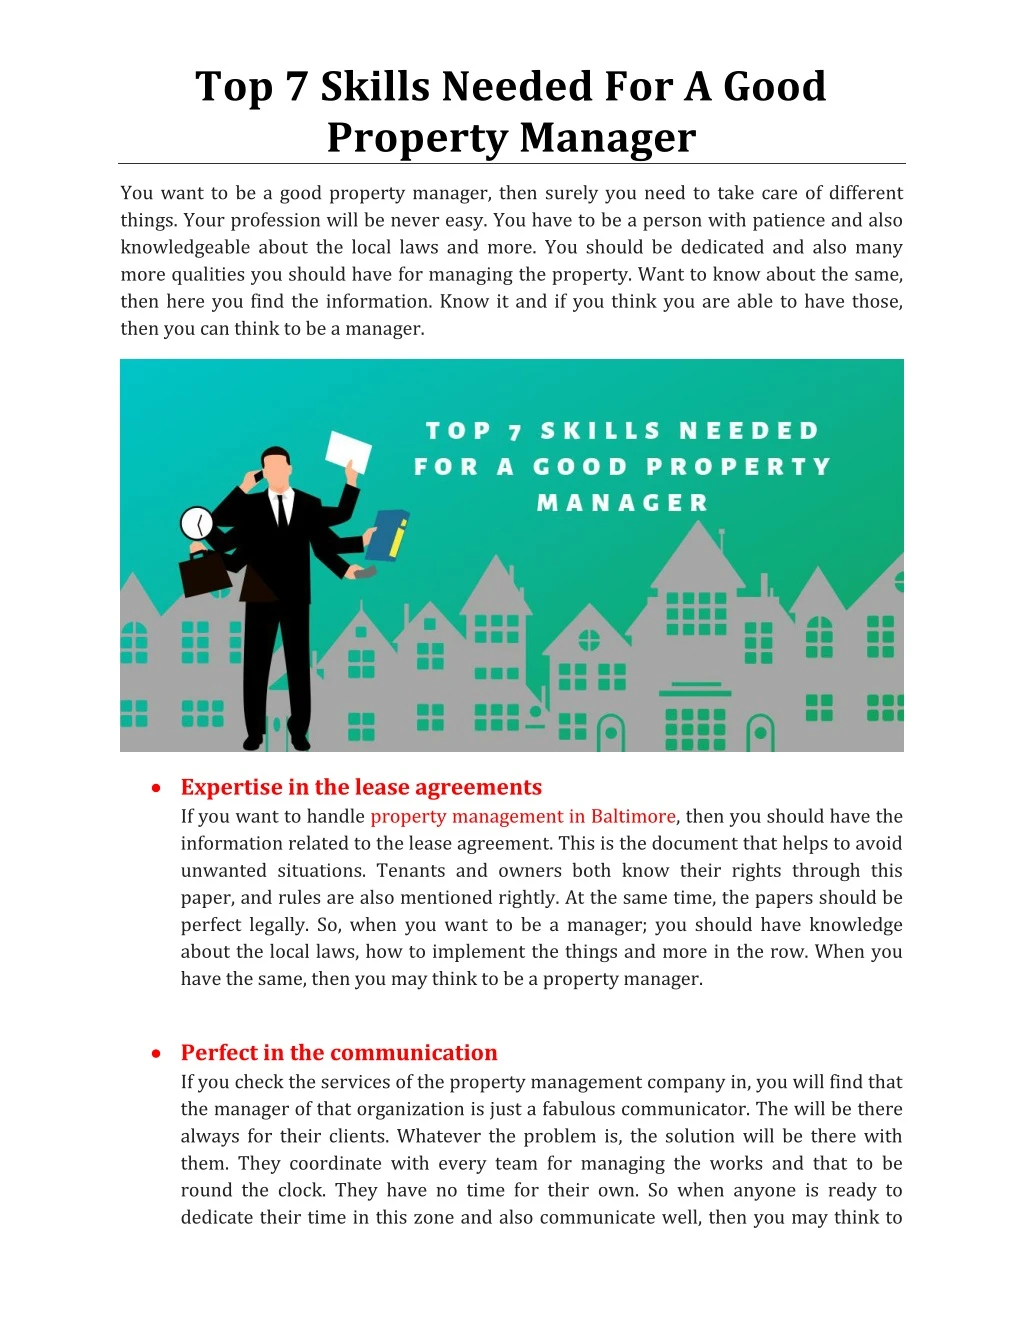 top 7 skills needed for a good property manager